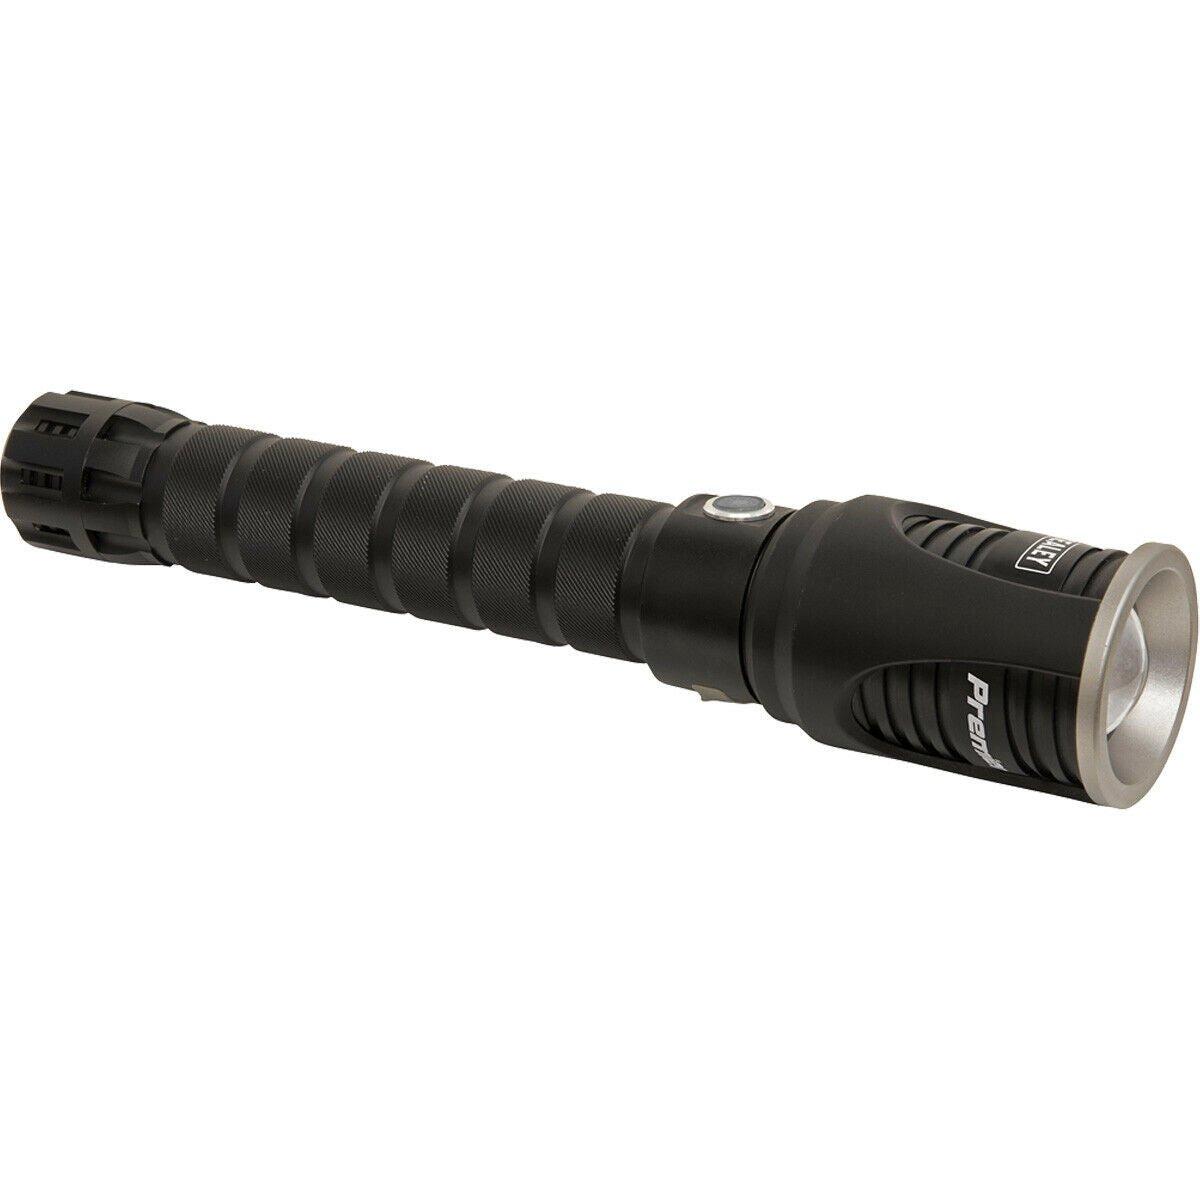 Aluminium Torch - 20W CREE XHP50 LED - Adjustable Focus - Rechargeable Battery